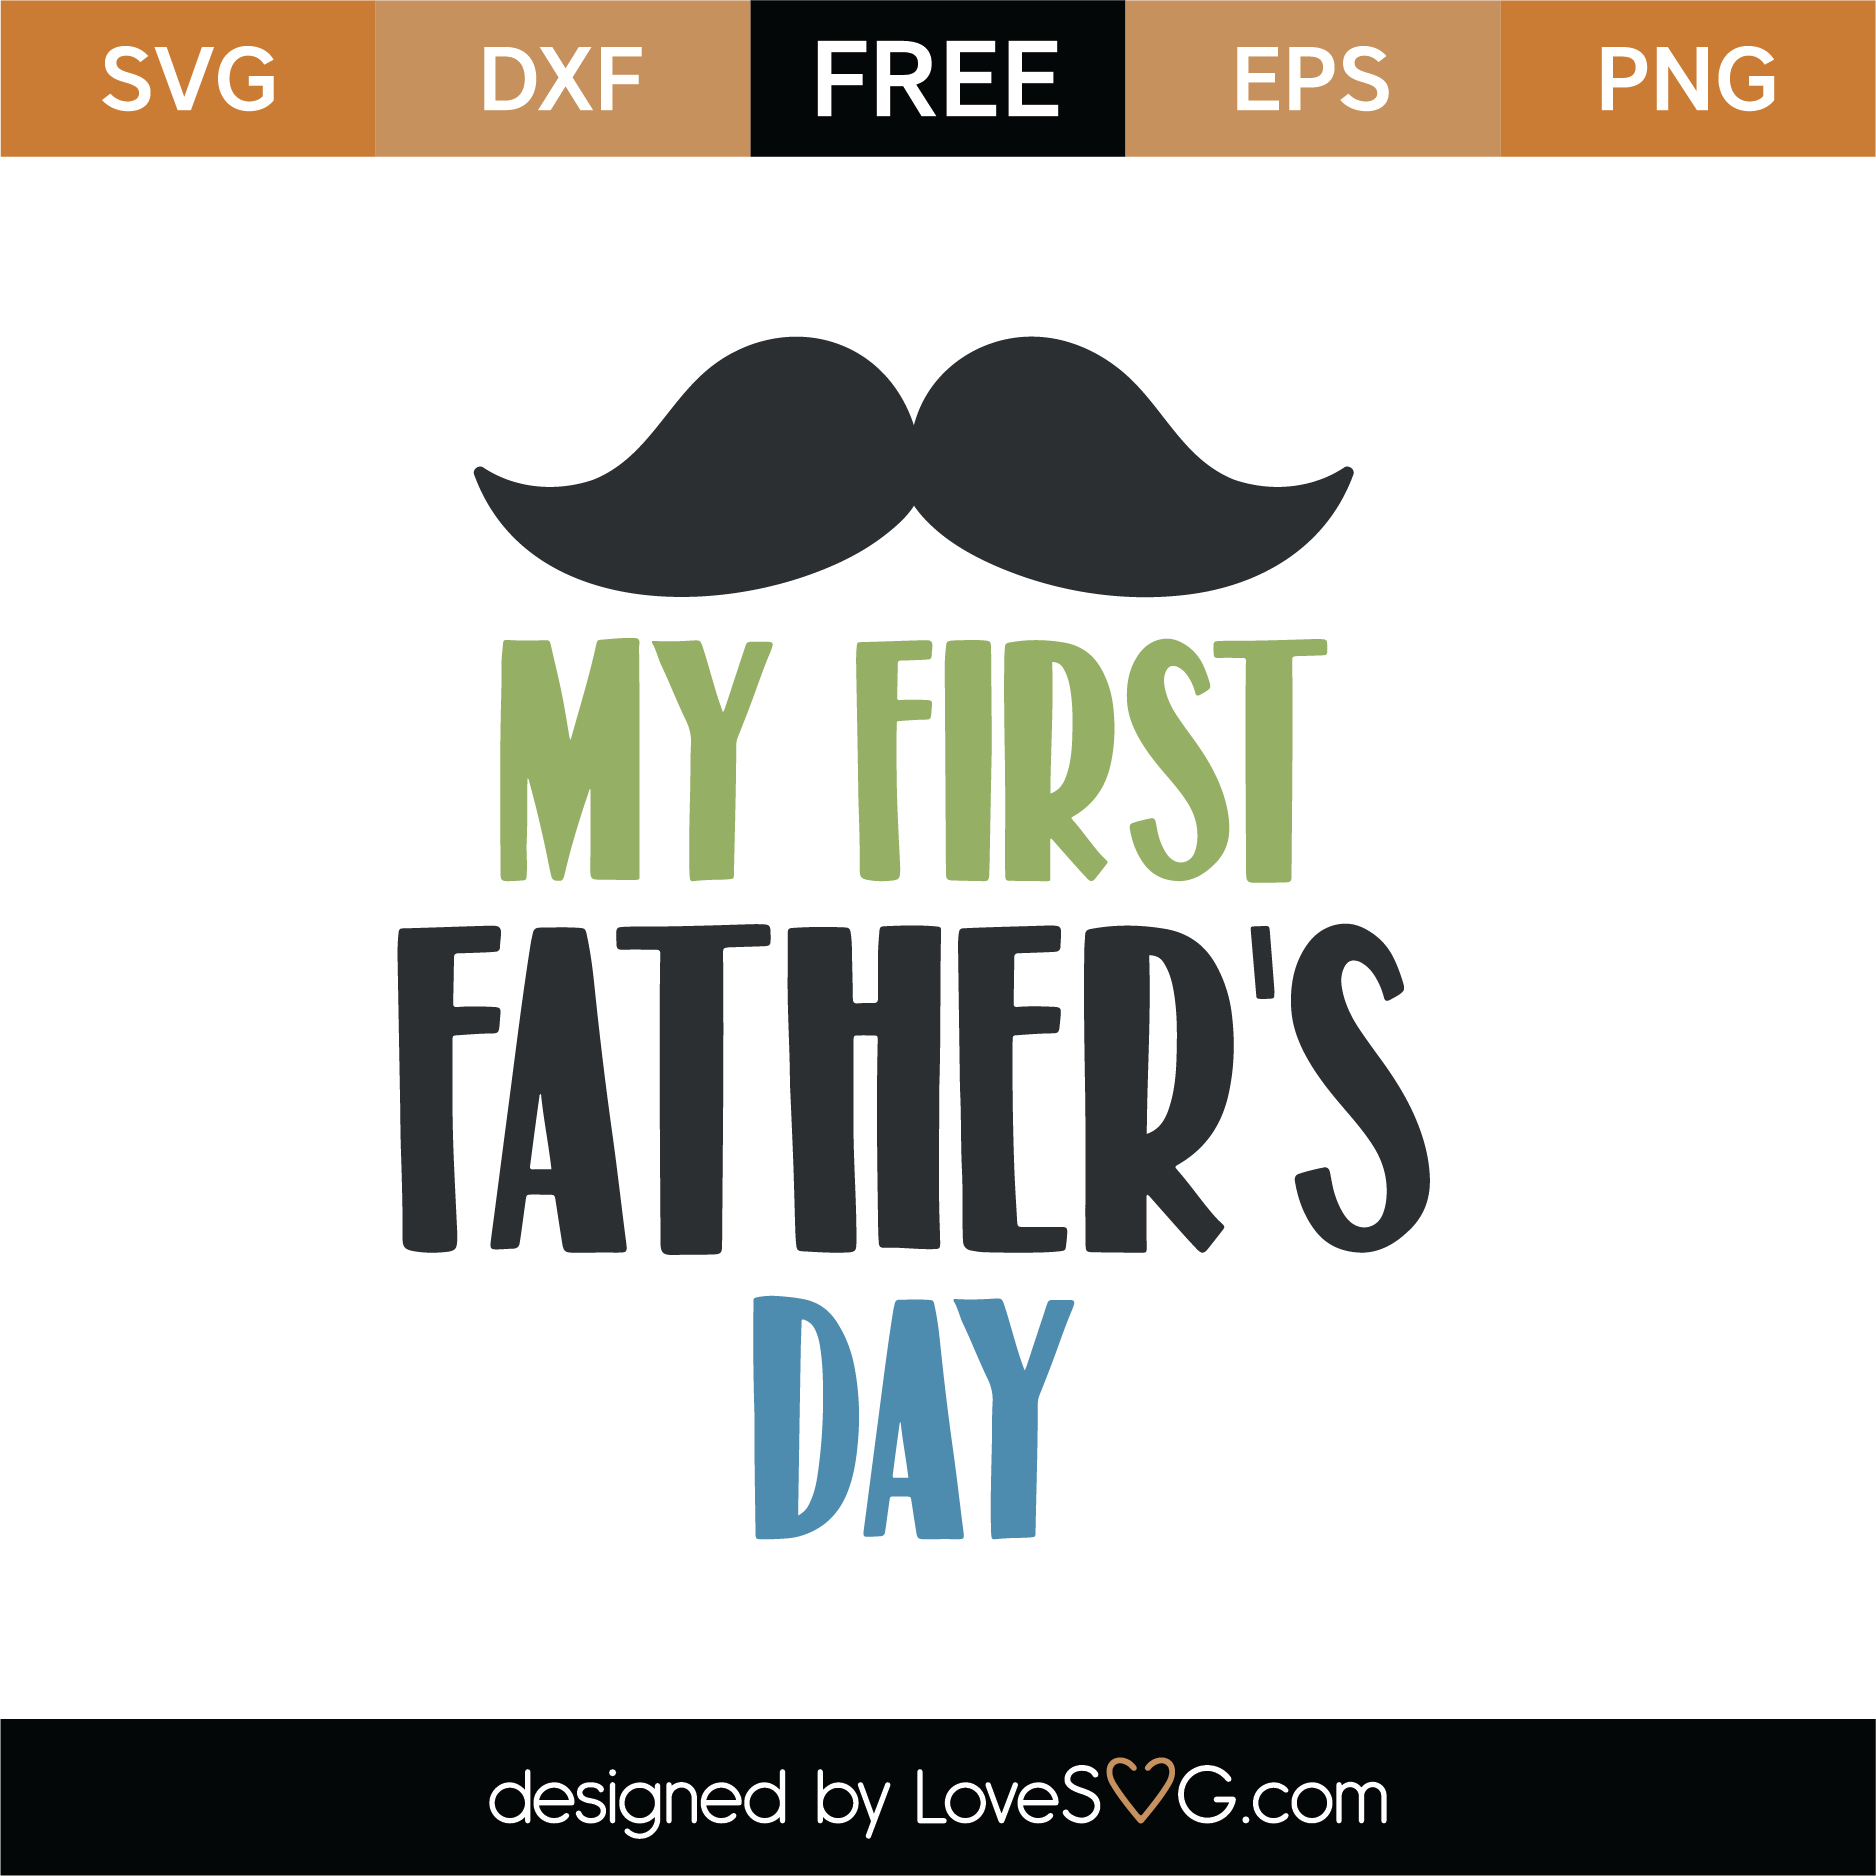 Free My First Father's Day SVG Cut File | Lovesvg.com